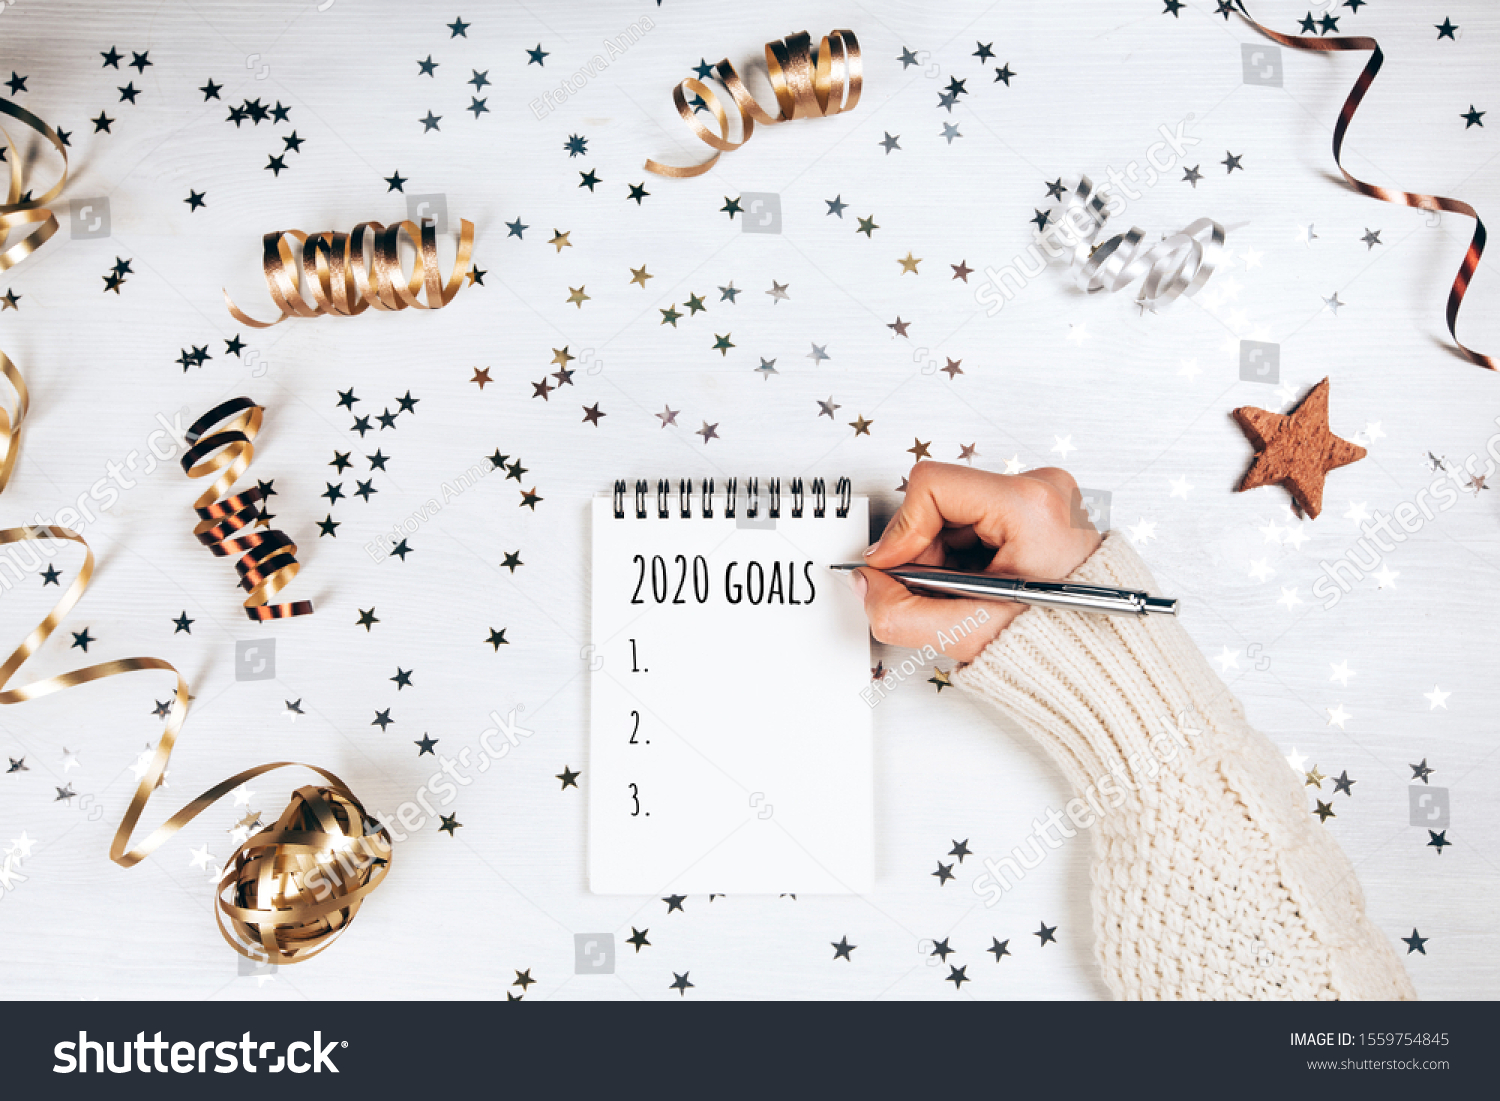 Holiday decorations and notebook with 2020 goals on white table, flat lay style. Christmas planning concept. #1559754845